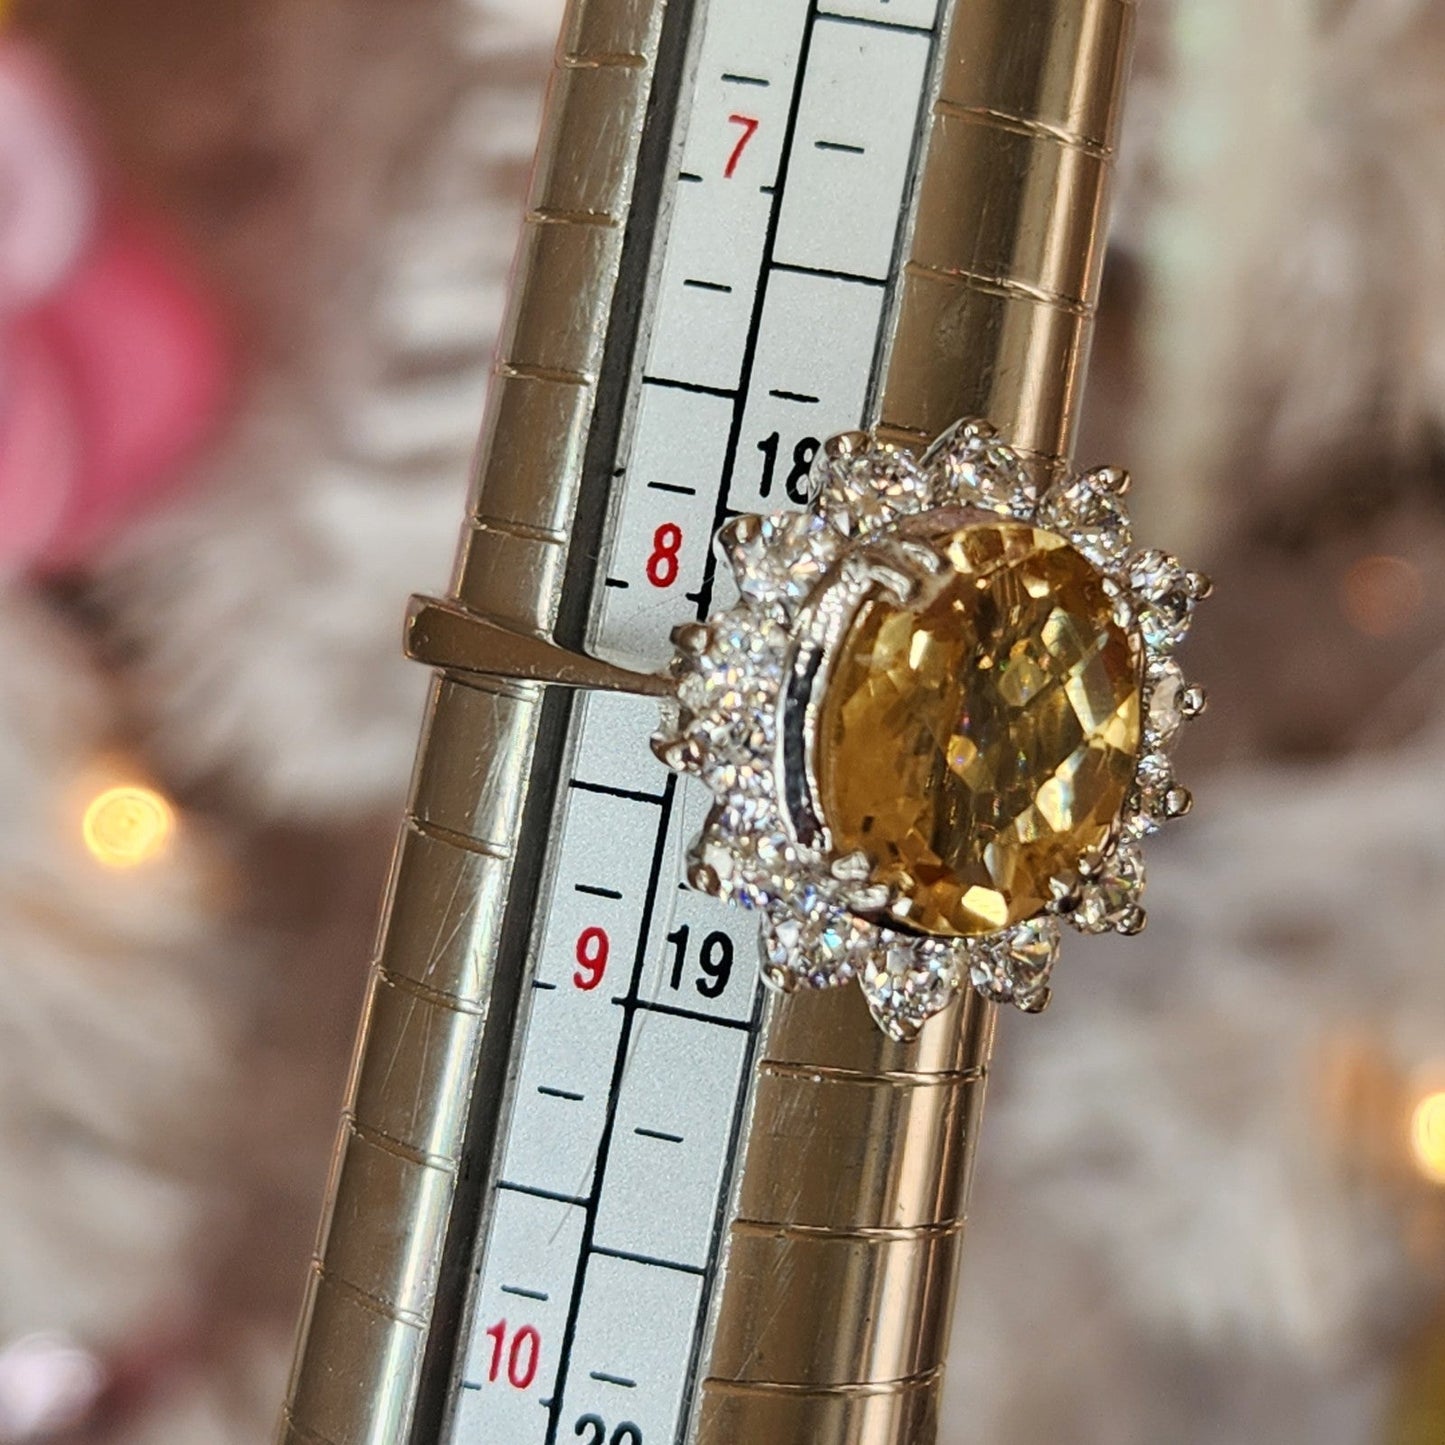 925 Sterling Silver Vintage Citrine and CZ Ring